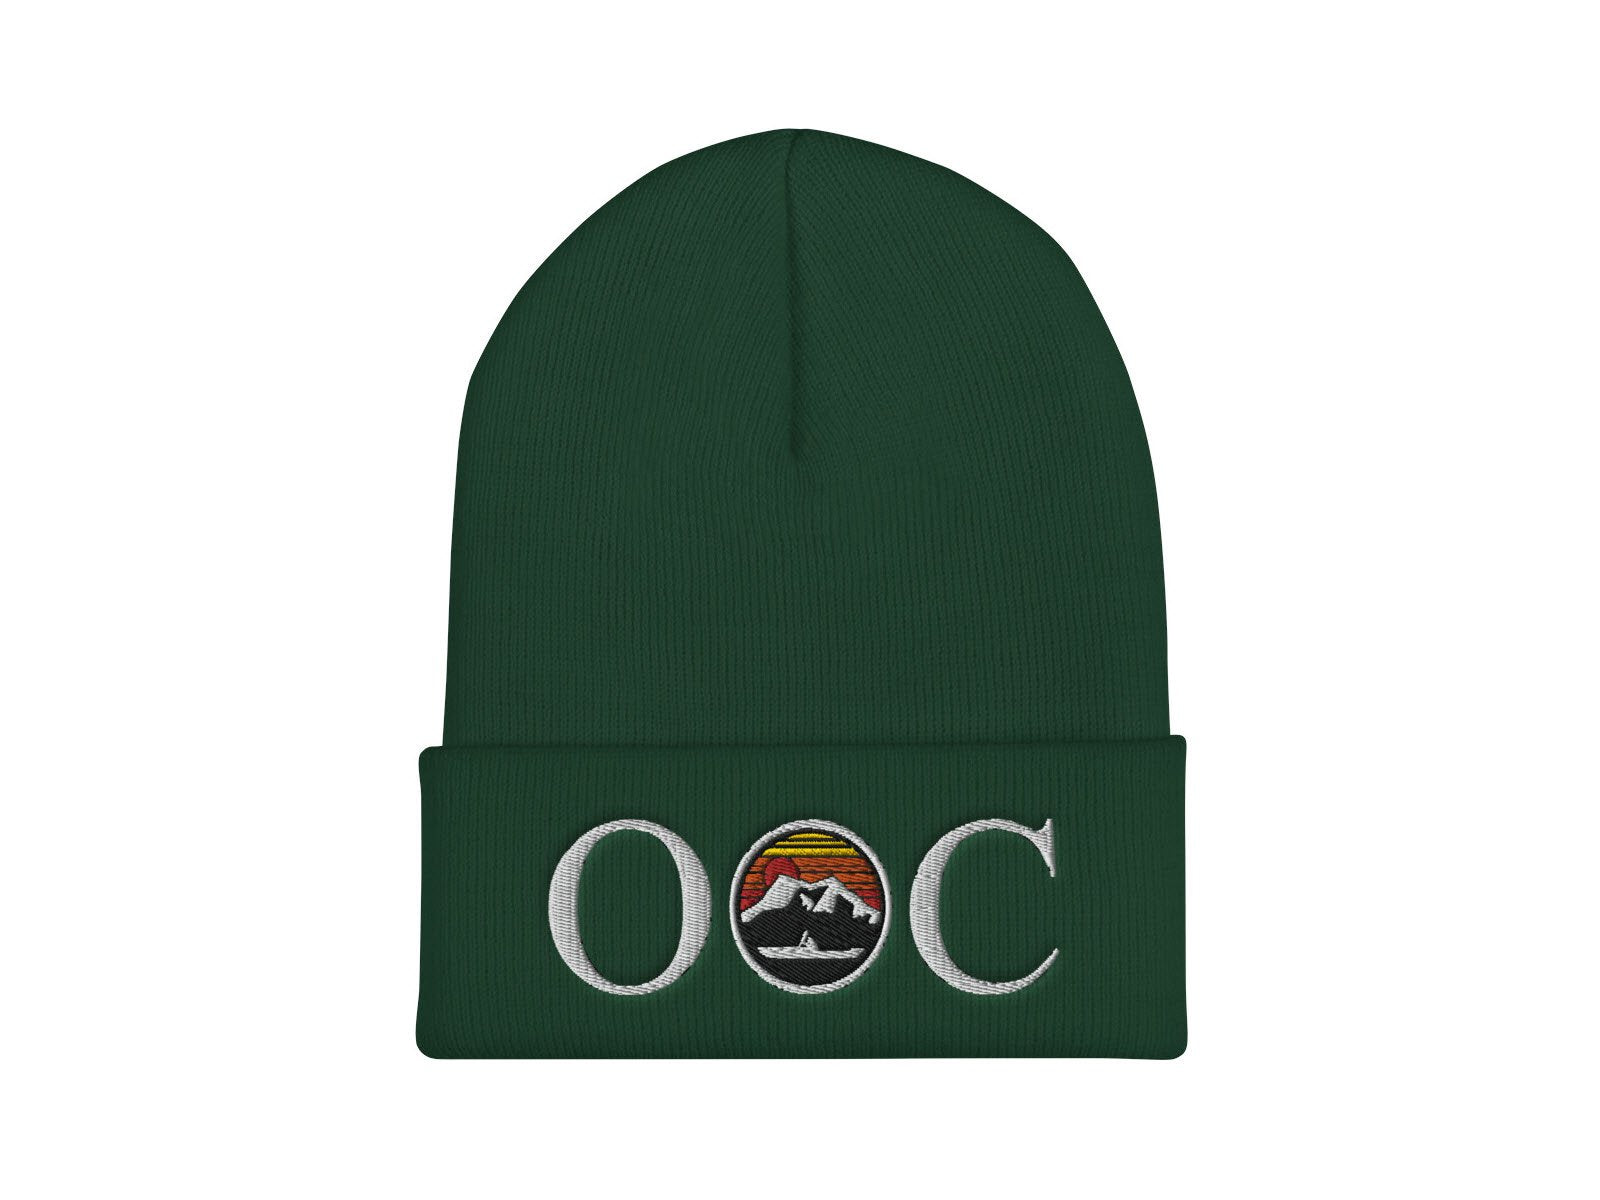 Olympic Outdoor Center OOC Logo Cuffed Beanie in Spruce